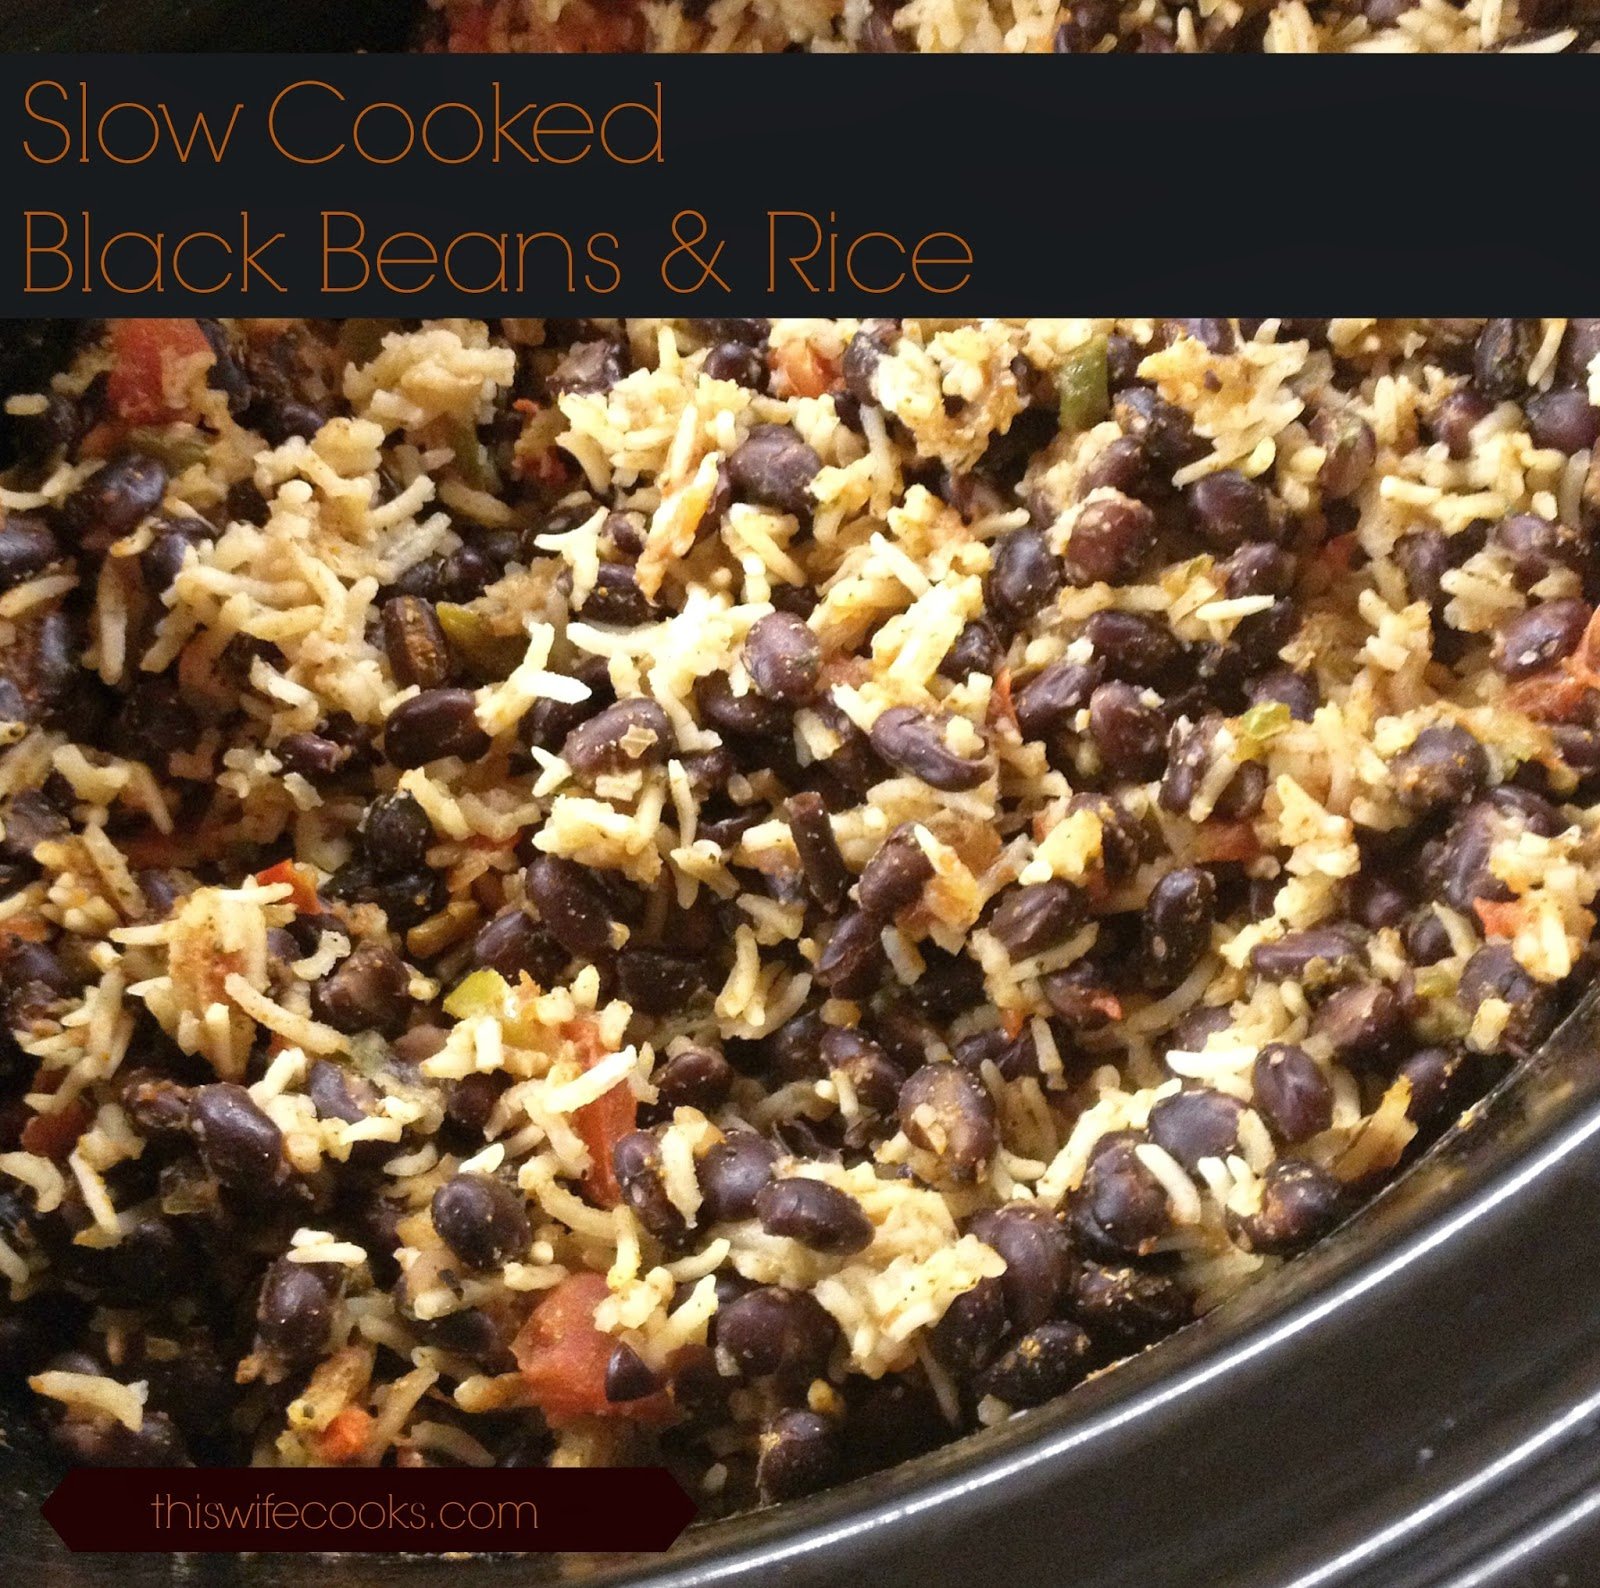 Easy Slow Cooker Black Beans and Rice! - A hearty and healthy, high protein, budget-friendly meal, ready to serve in about 3 hours!